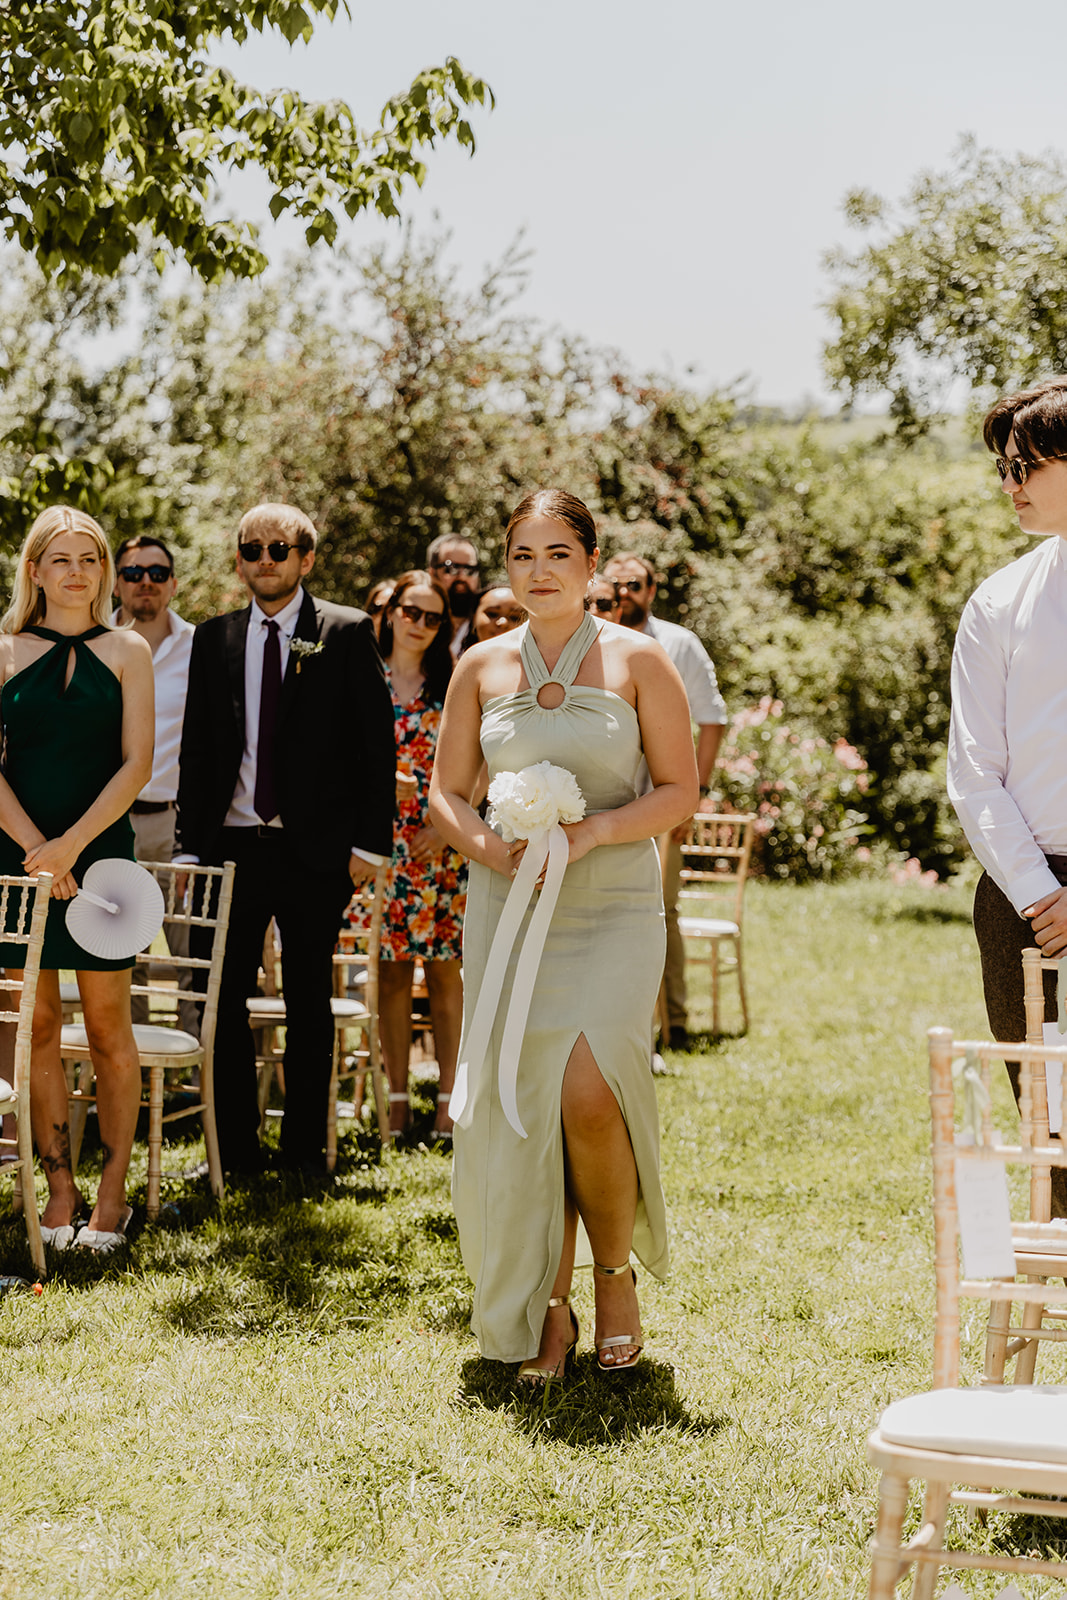 A bridesmaid walks down the aisle at a Destination Wedding in France. Photography & Videography by OliveJoy Photography